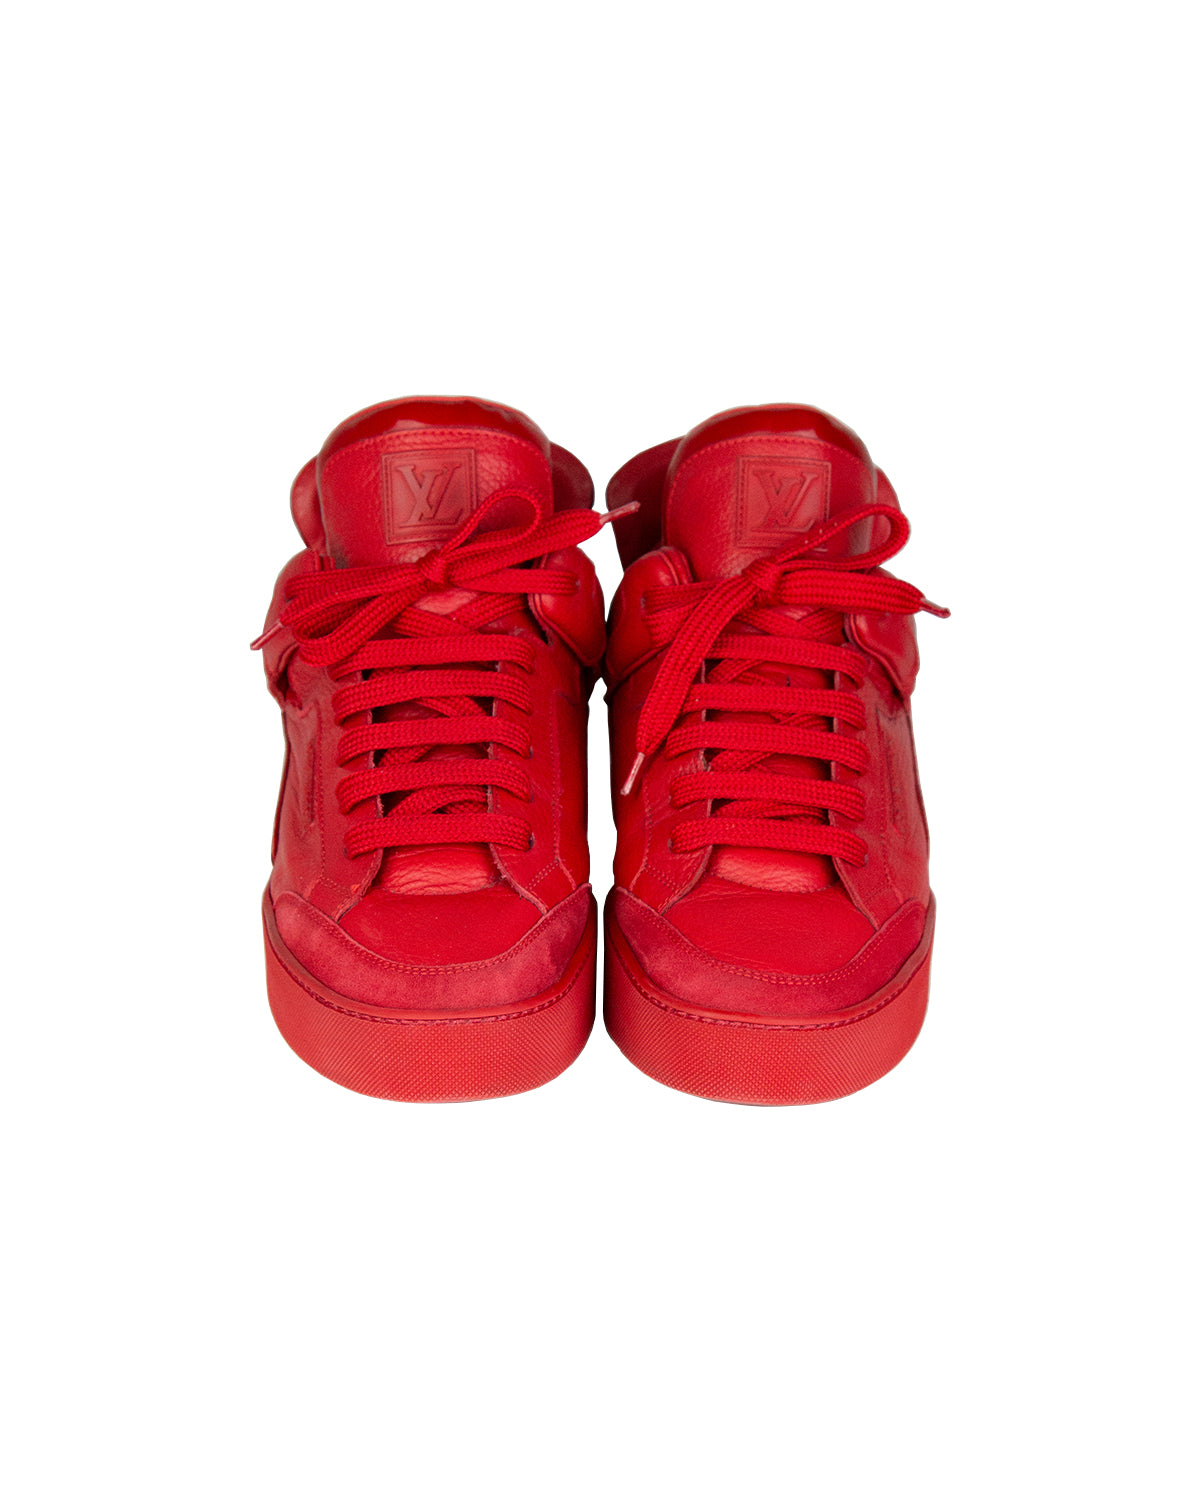 Louis Vuitton Don x Kanye West Red LV Size 9.5